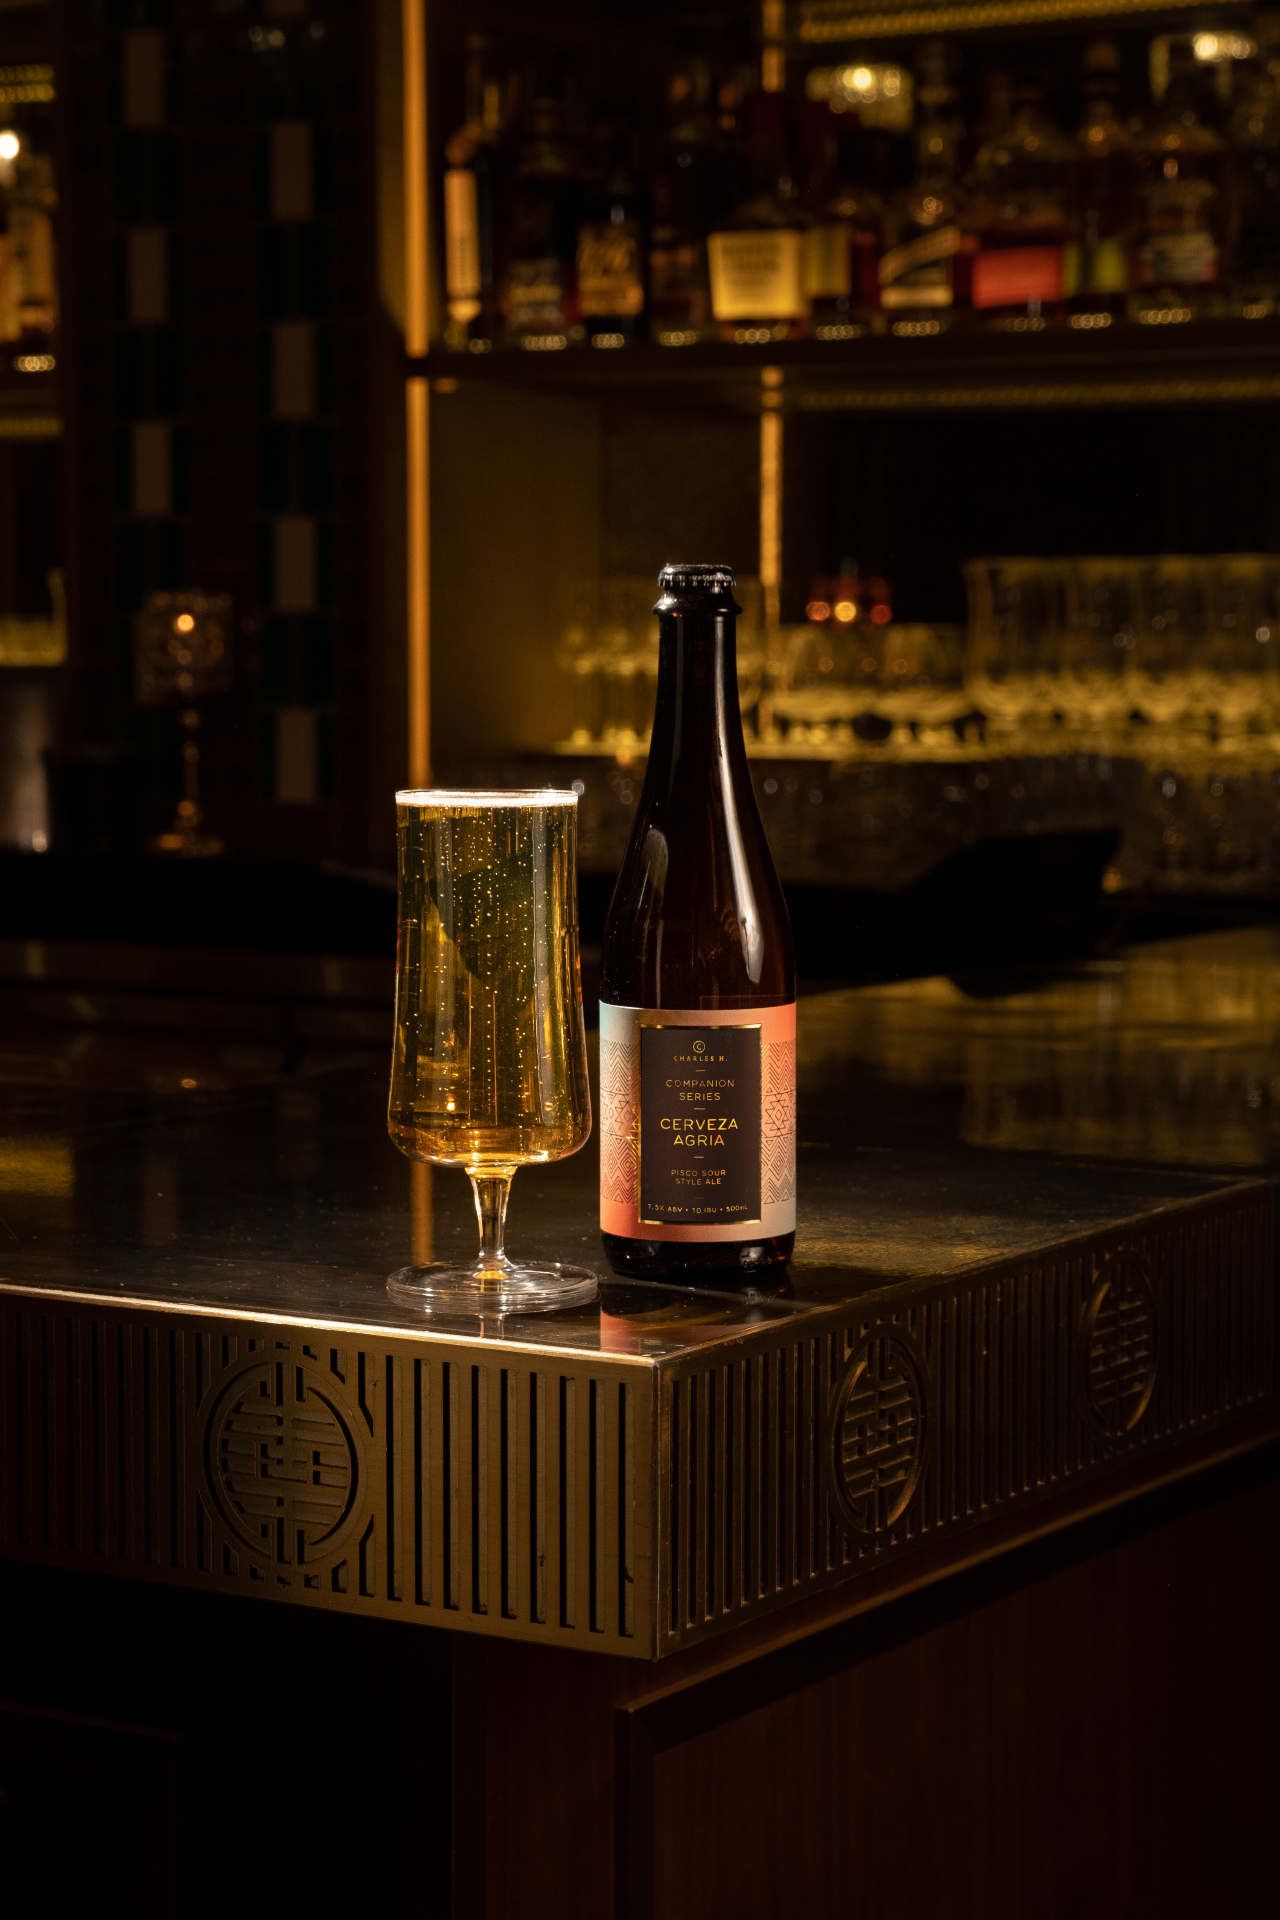 Cerveza Agria, Four Seasons Hotel Seoul's latest craft beer served at speakeasy bar Charles H. (Four Seasons Hotel Seoul)